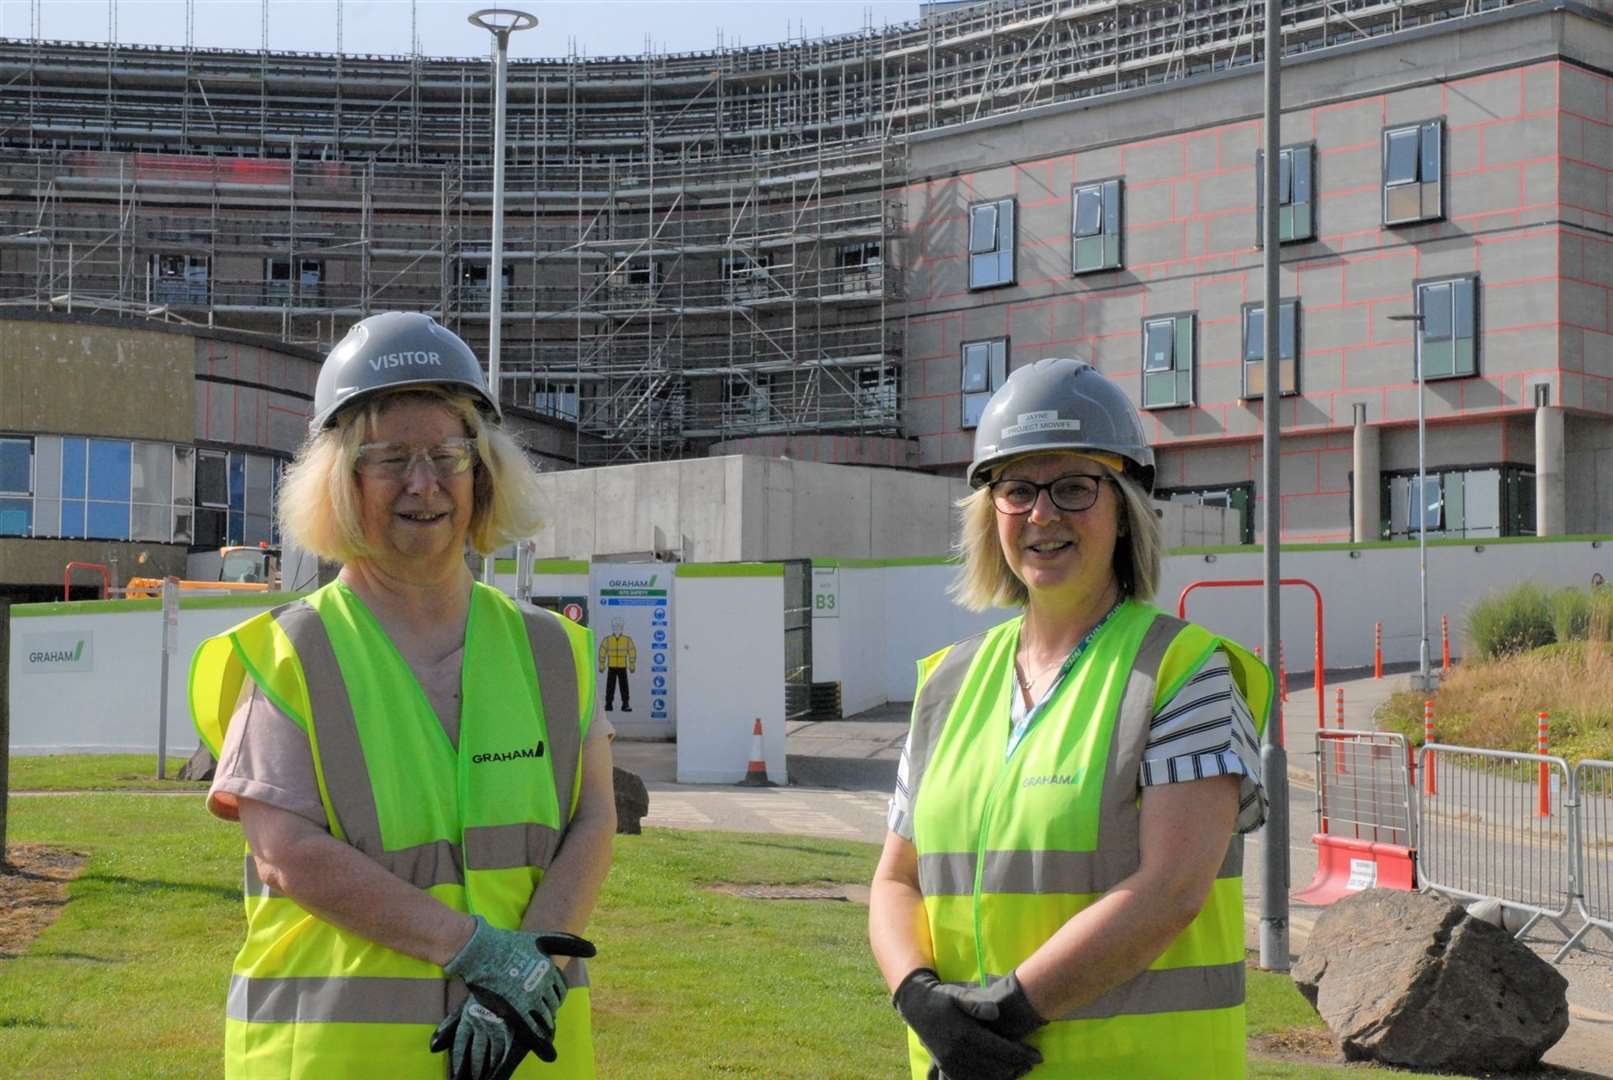 Aberdeen Sands chairwoman Fiona Donald (left) and project mamager Jayne Forrest